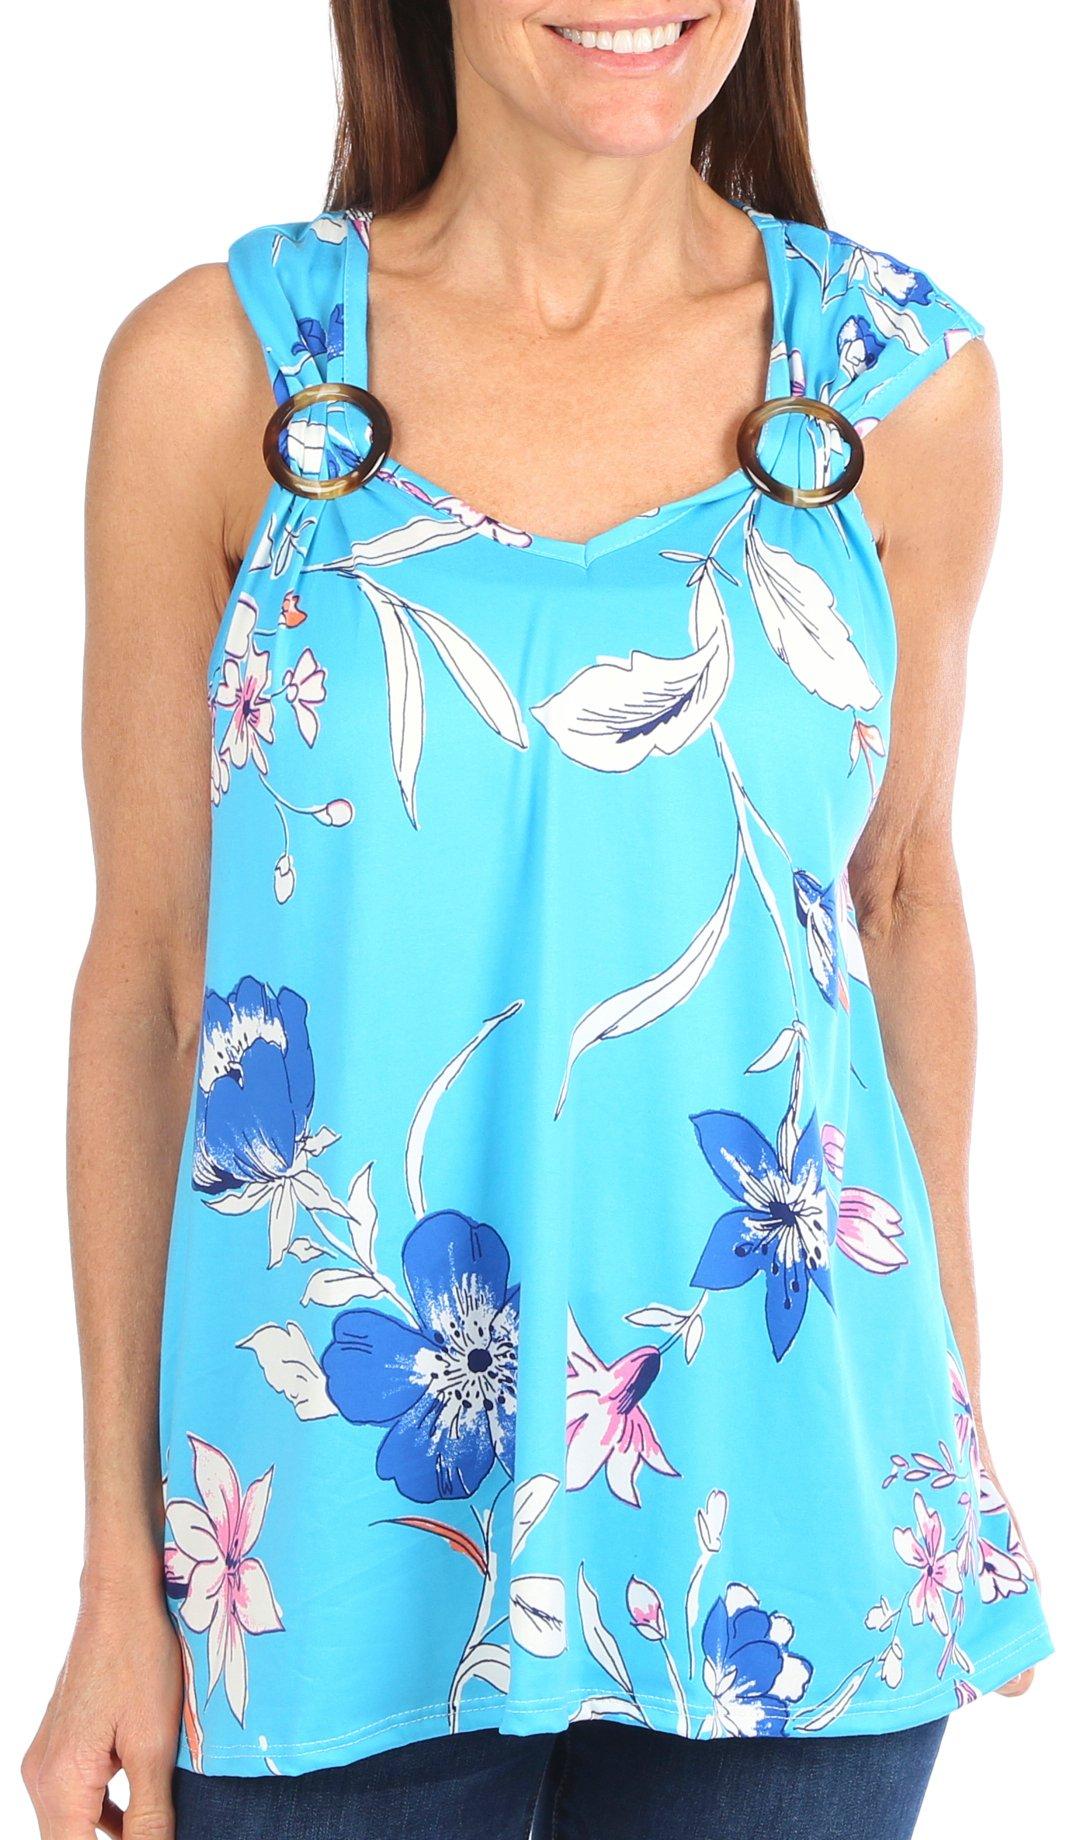 Juniper + Lime Womens Tropical Coconut Ring Sleeveless Top